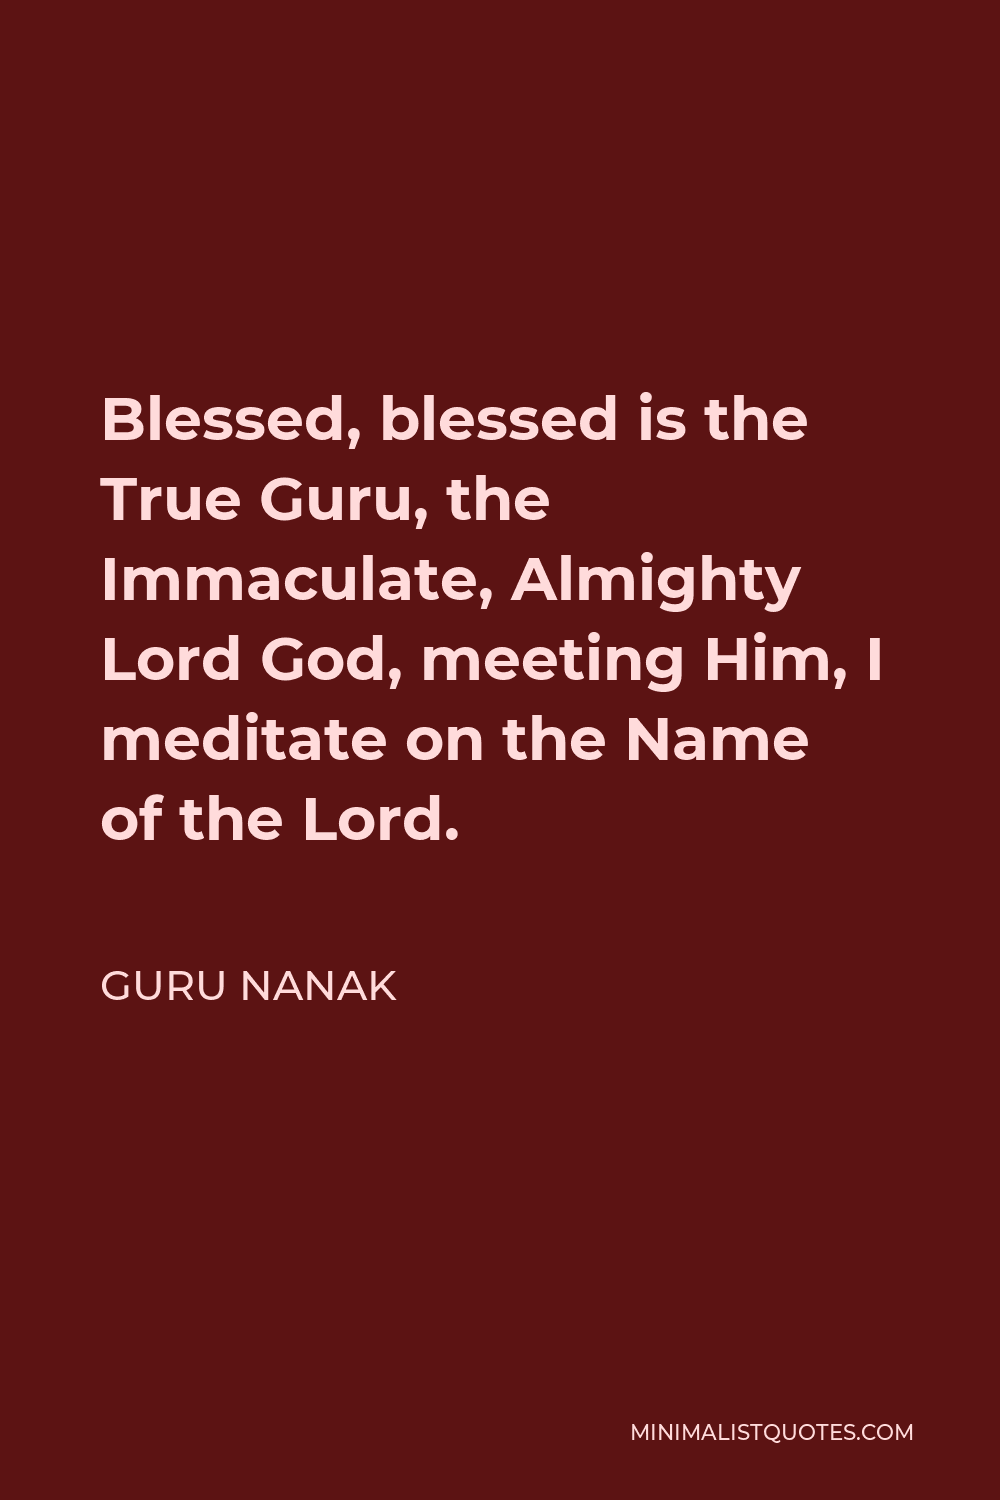 Guru Nanak Quote - Blessed, blessed is the True Guru, the Immaculate, Almighty Lord God, meeting Him, I meditate on the Name of the Lord.